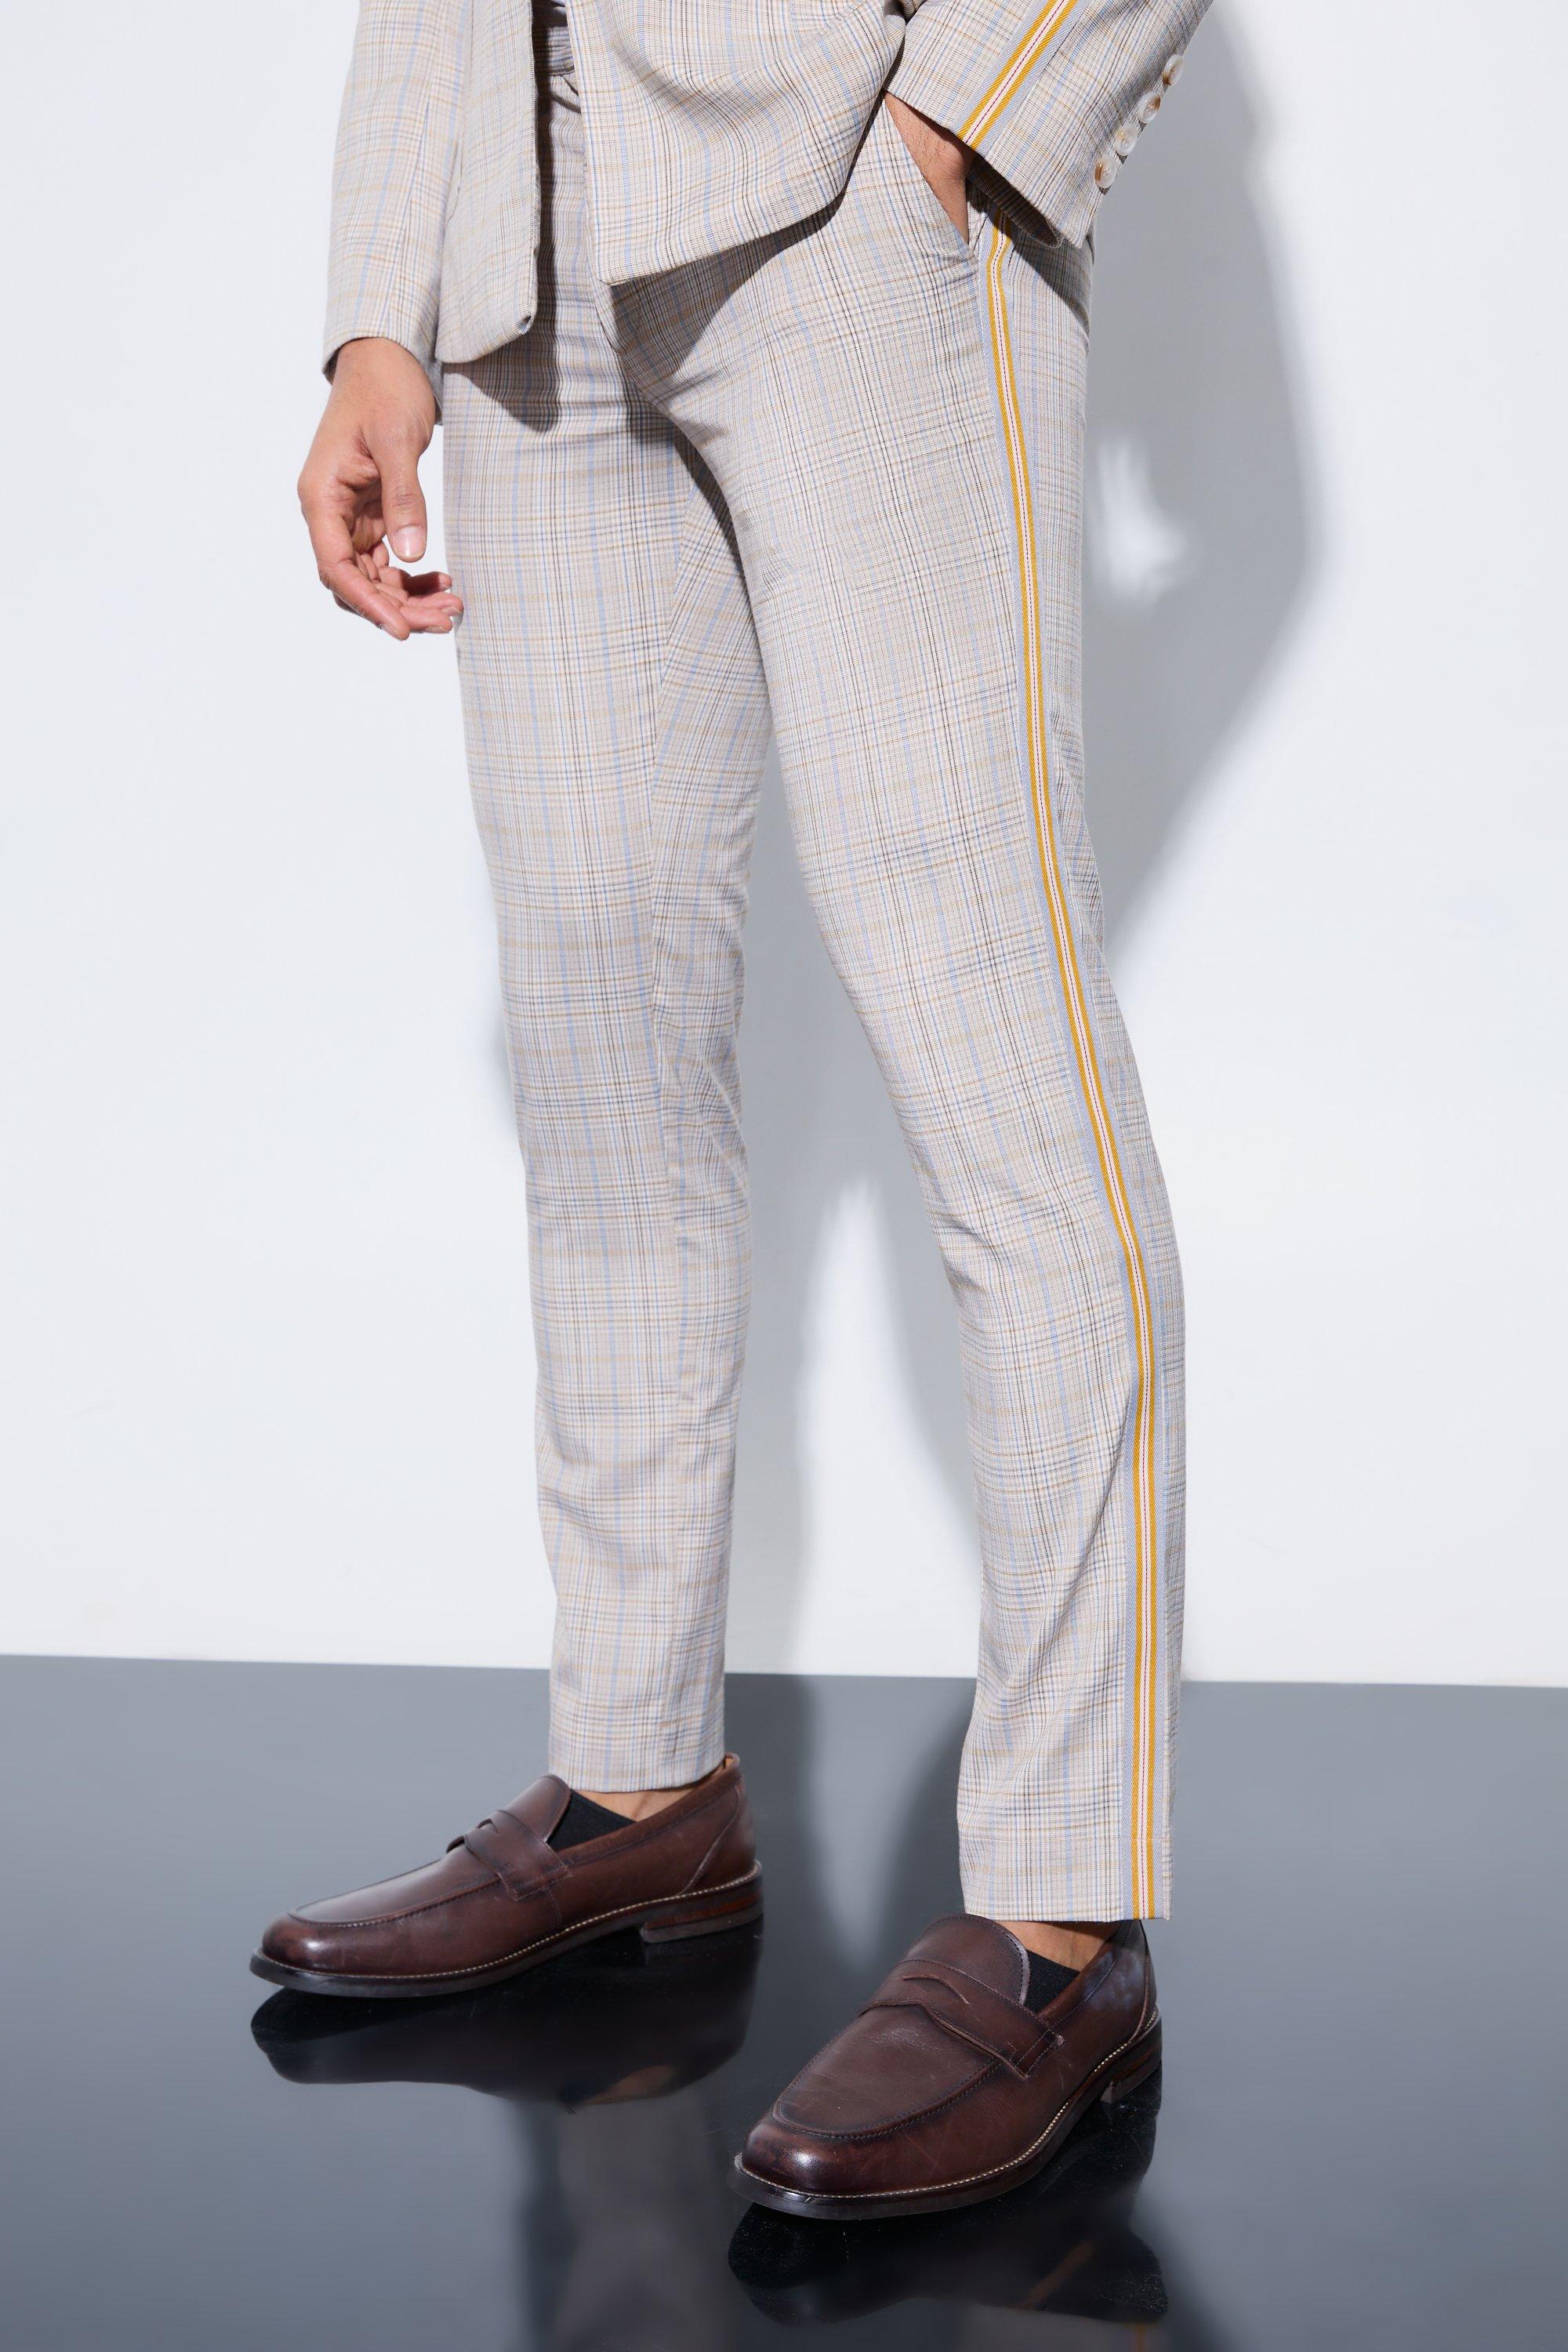 uNidraa | Beige Black Checked Printed Cotton Lounge Pants For Men